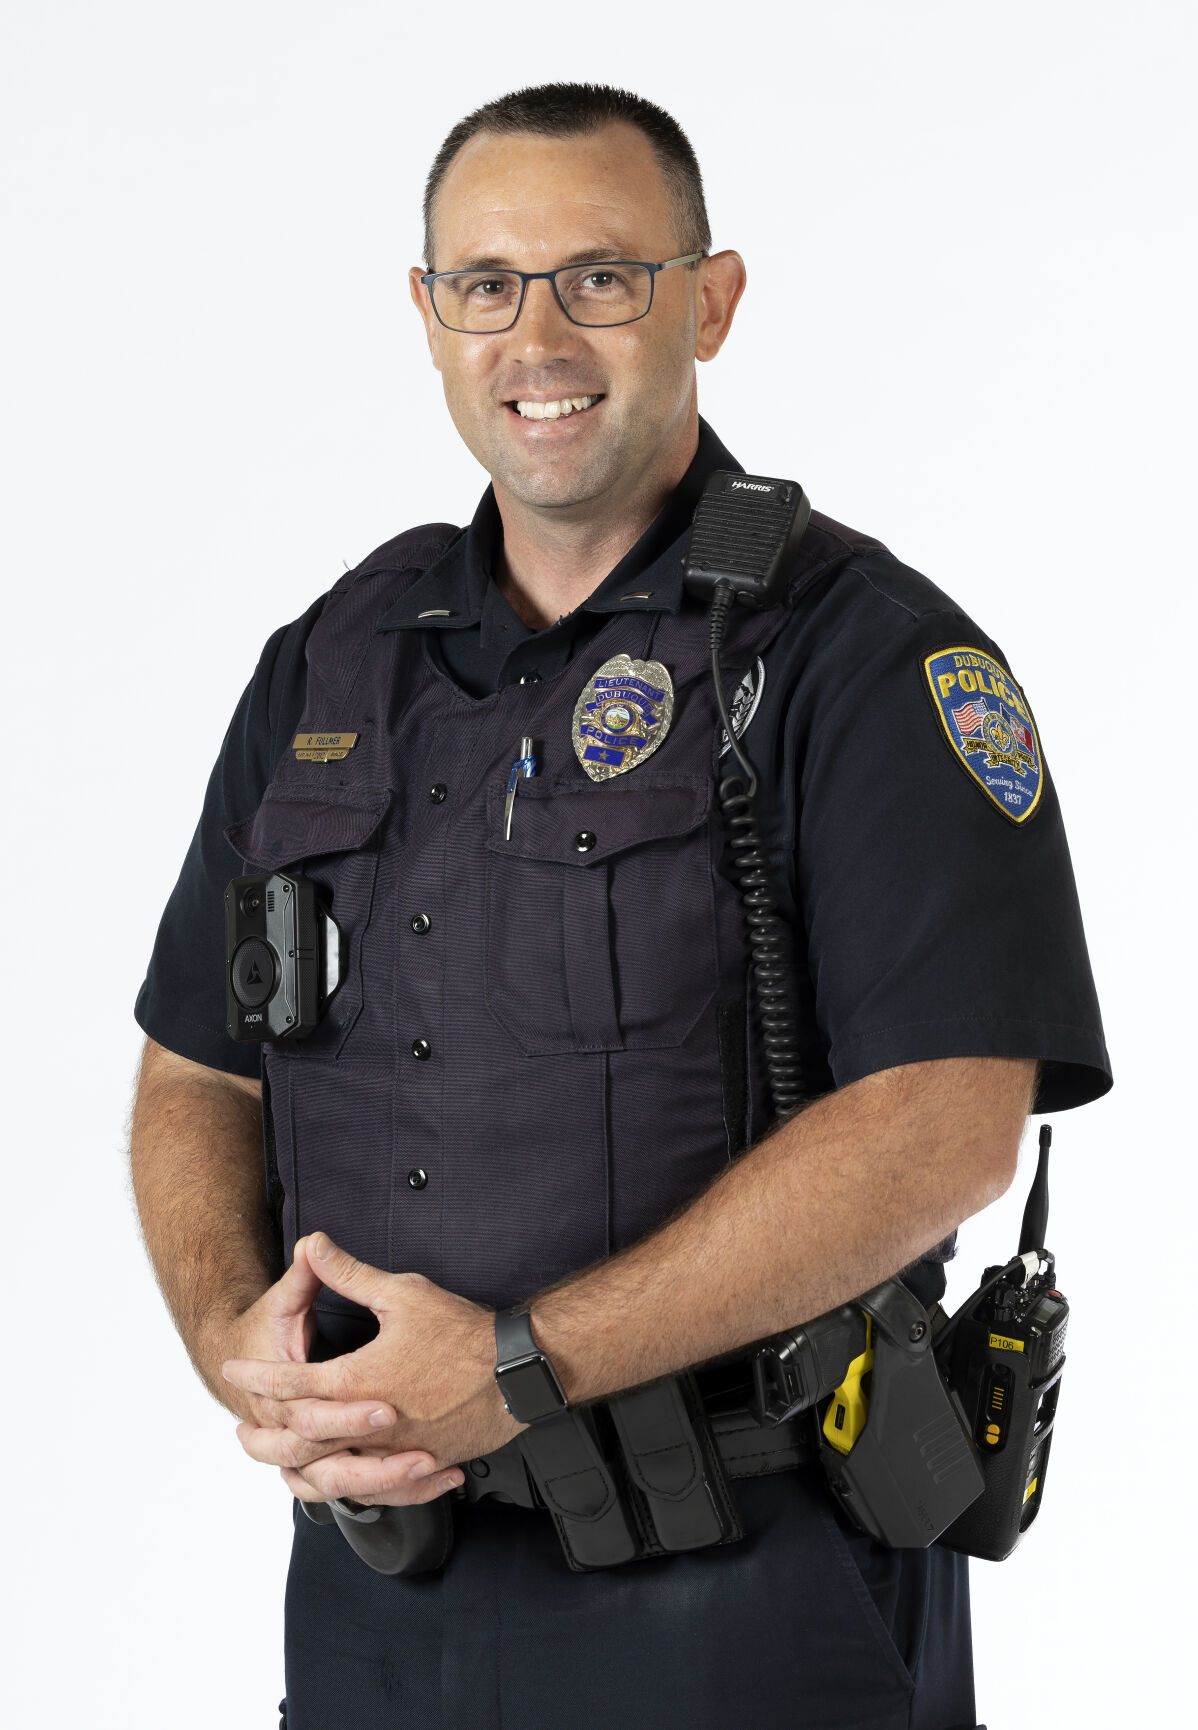 Lieutenant Richard Fullmer, with the Dubuque Police Department, is a Rising Star.    PHOTO CREDIT: Stephen Gassman